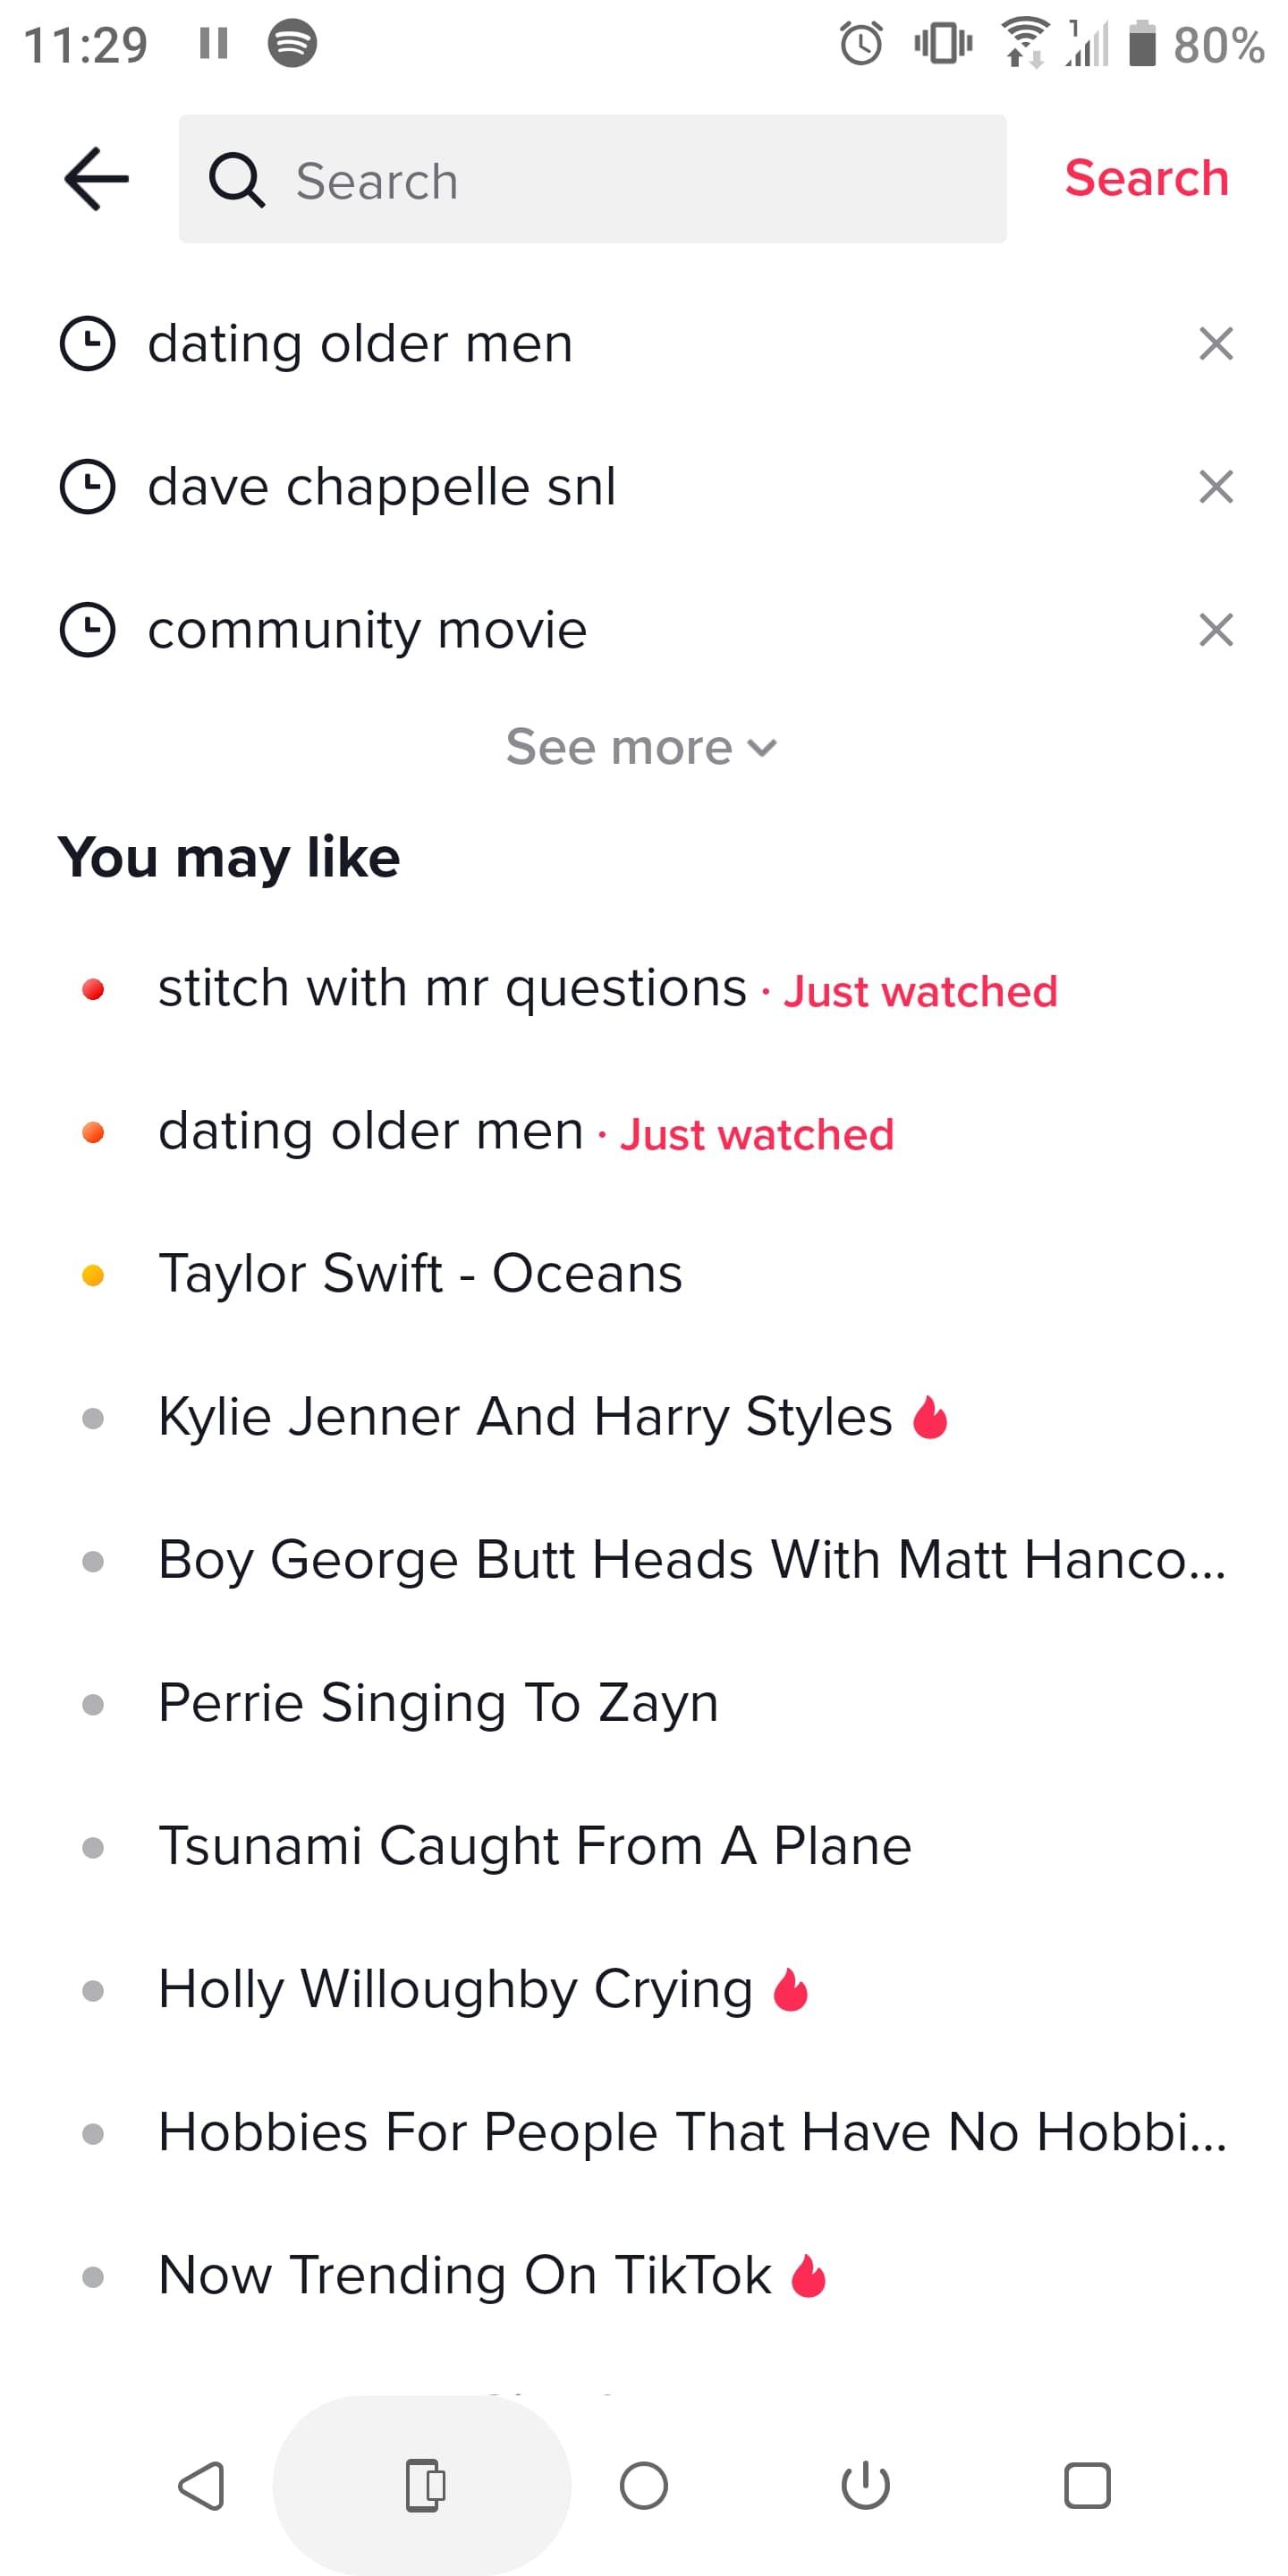 TikTok search you may like video suggestions